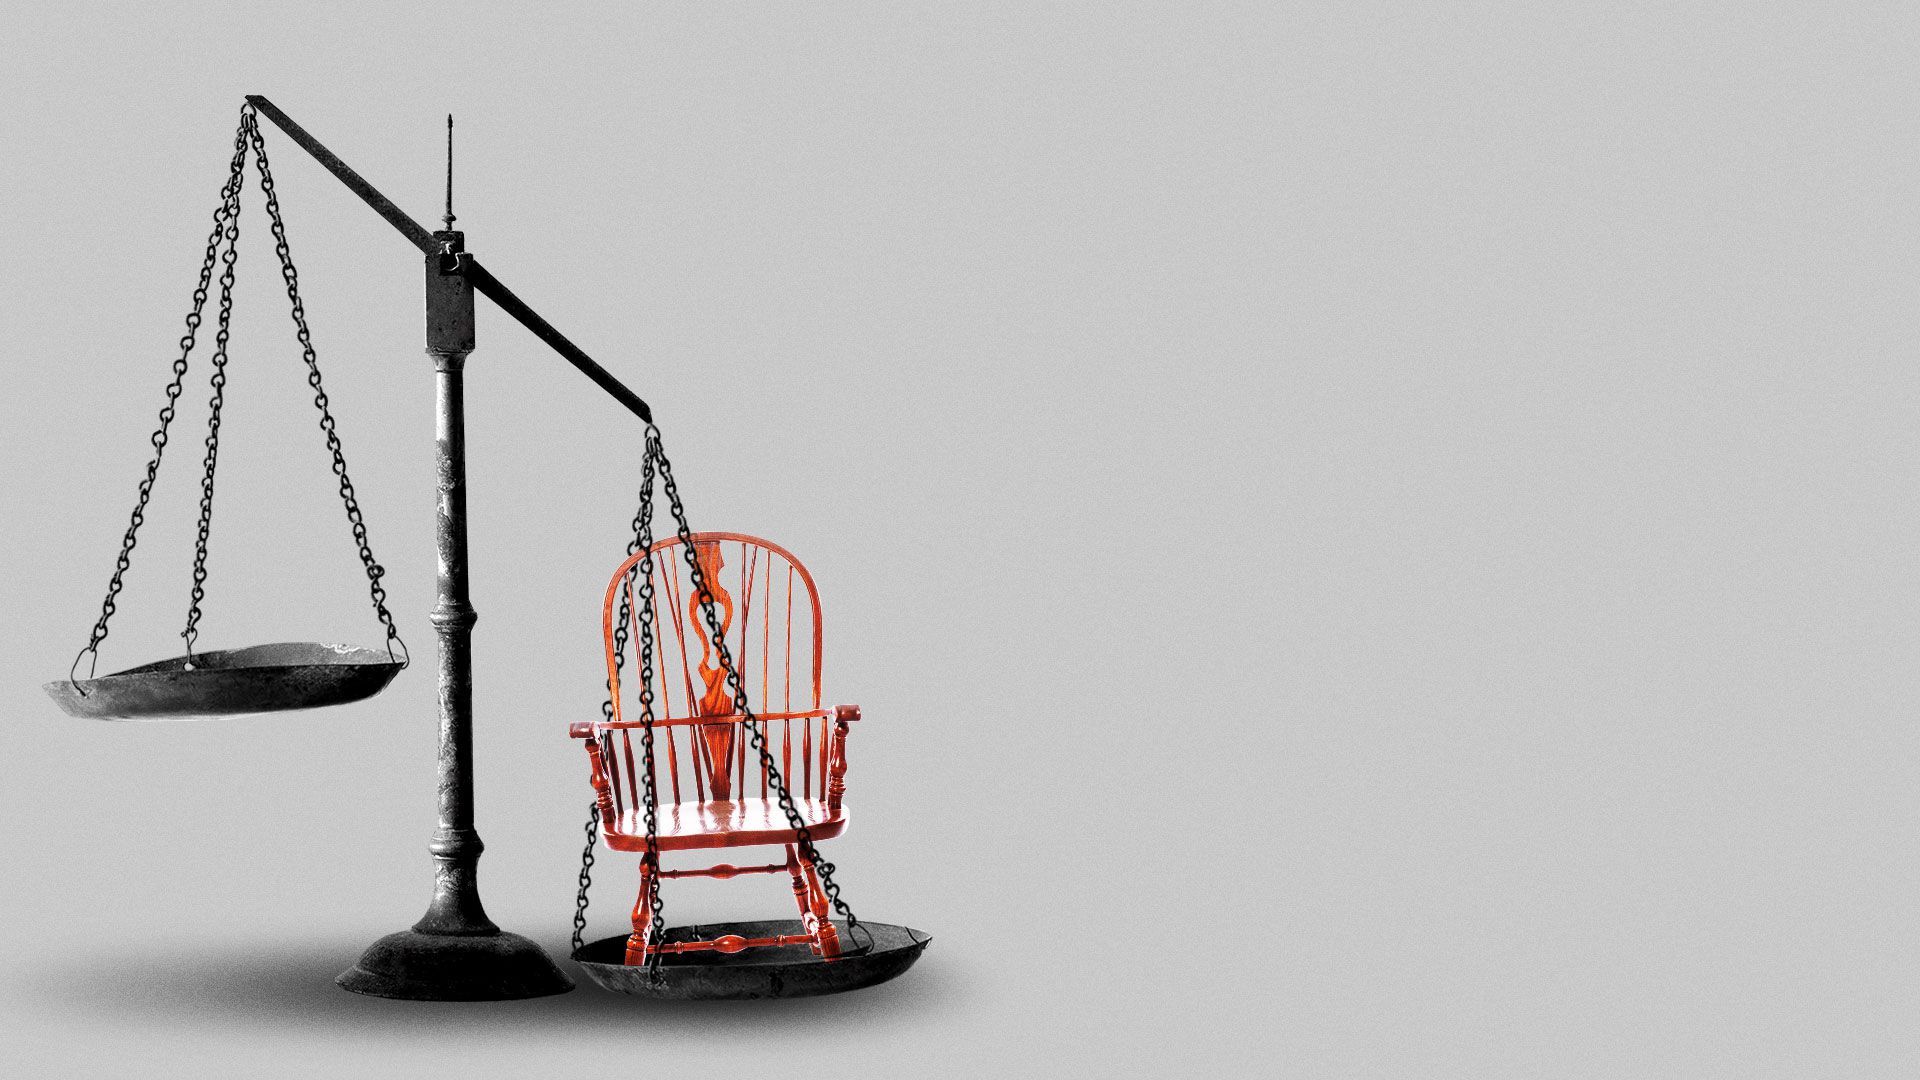 Illustration of scales of justice with a Supreme Court chair weighing one side down